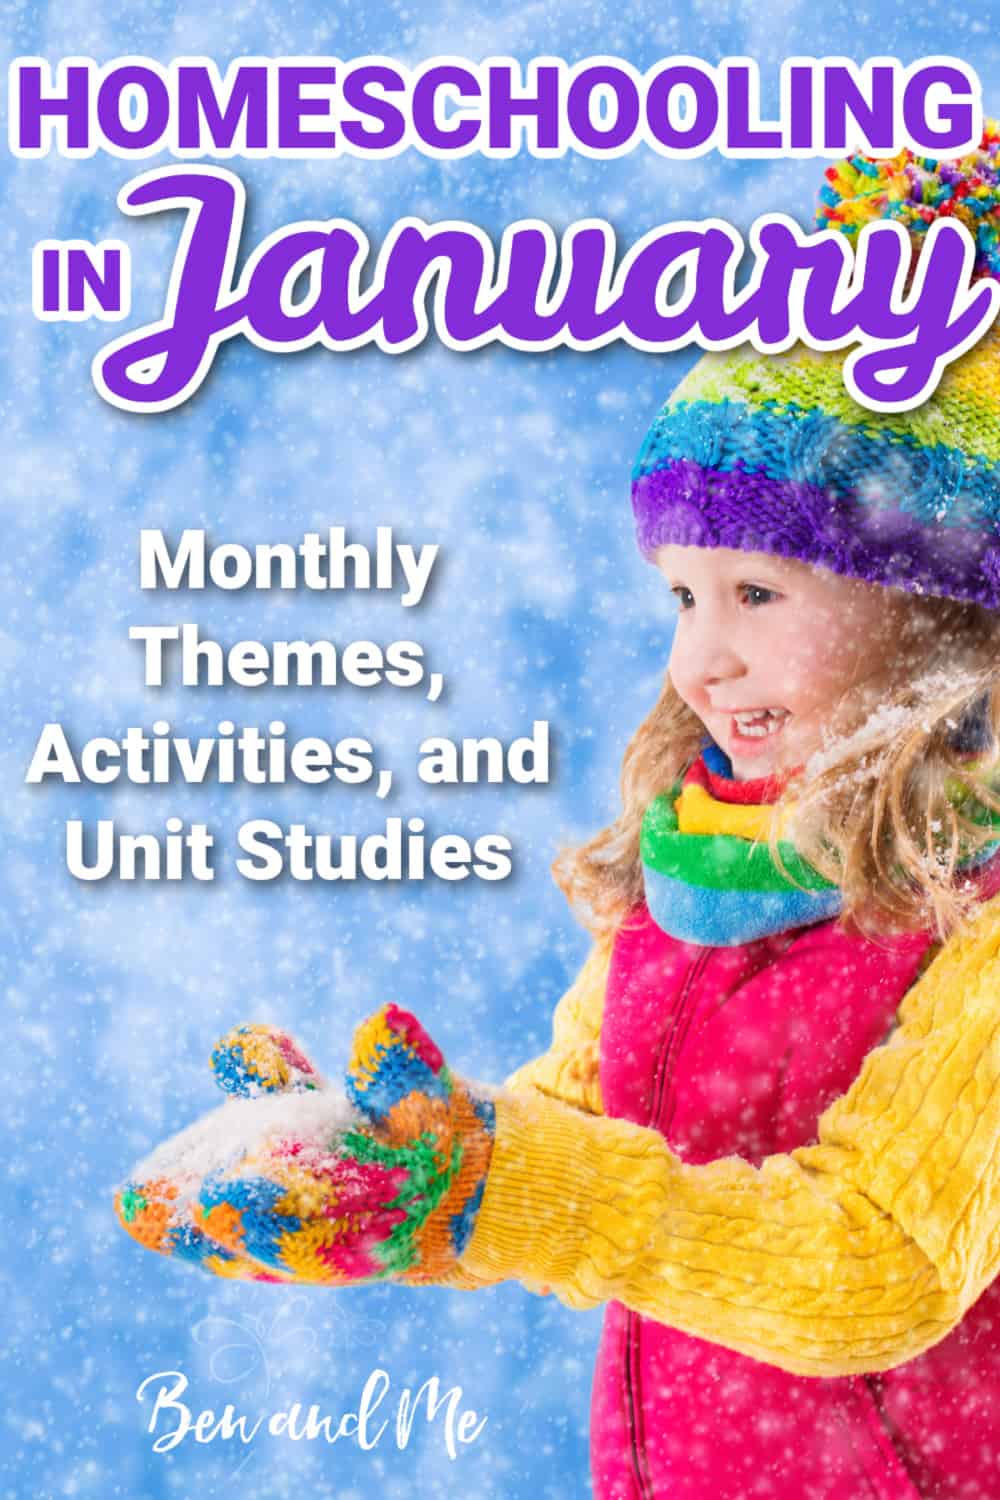 Make homeschooling in January more fun and inspiring with these monthly themes, activities, and unit studies. #homeschool #yearroundhomeschool #unitstudies